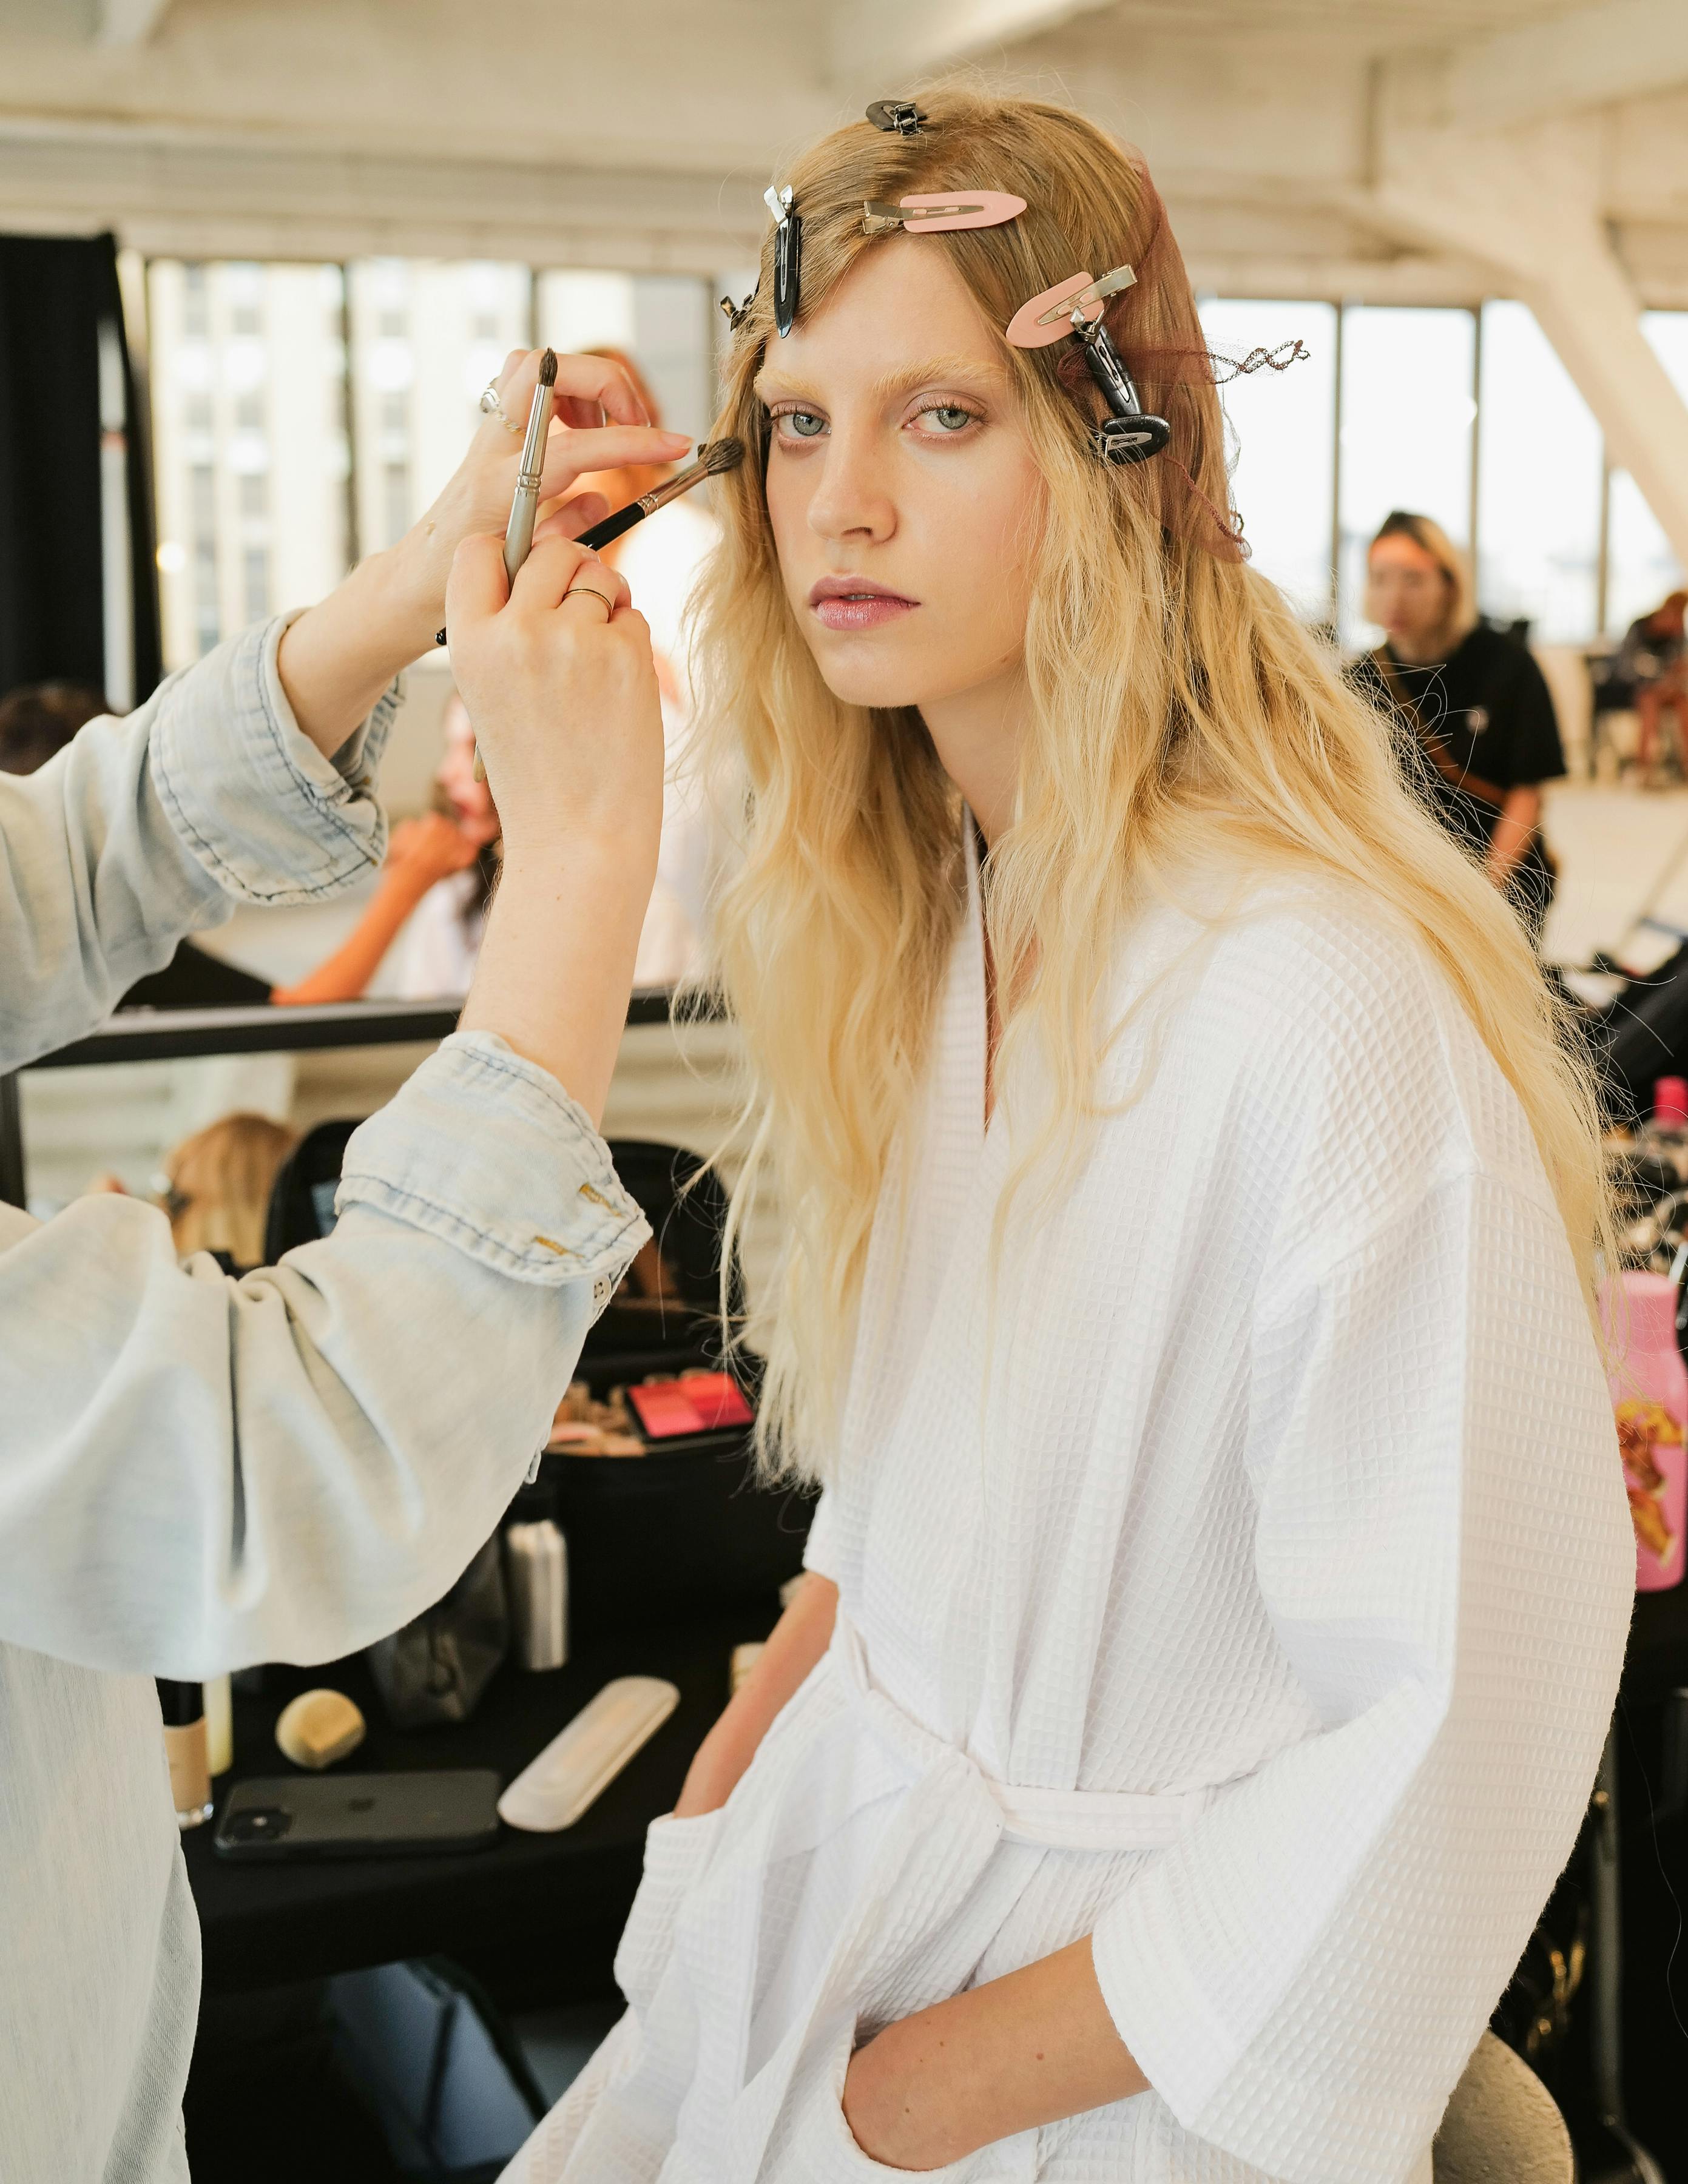 Louis Vuitton Brown' Is Set to Be a Hot Hair Trend This Summer - NewBeauty